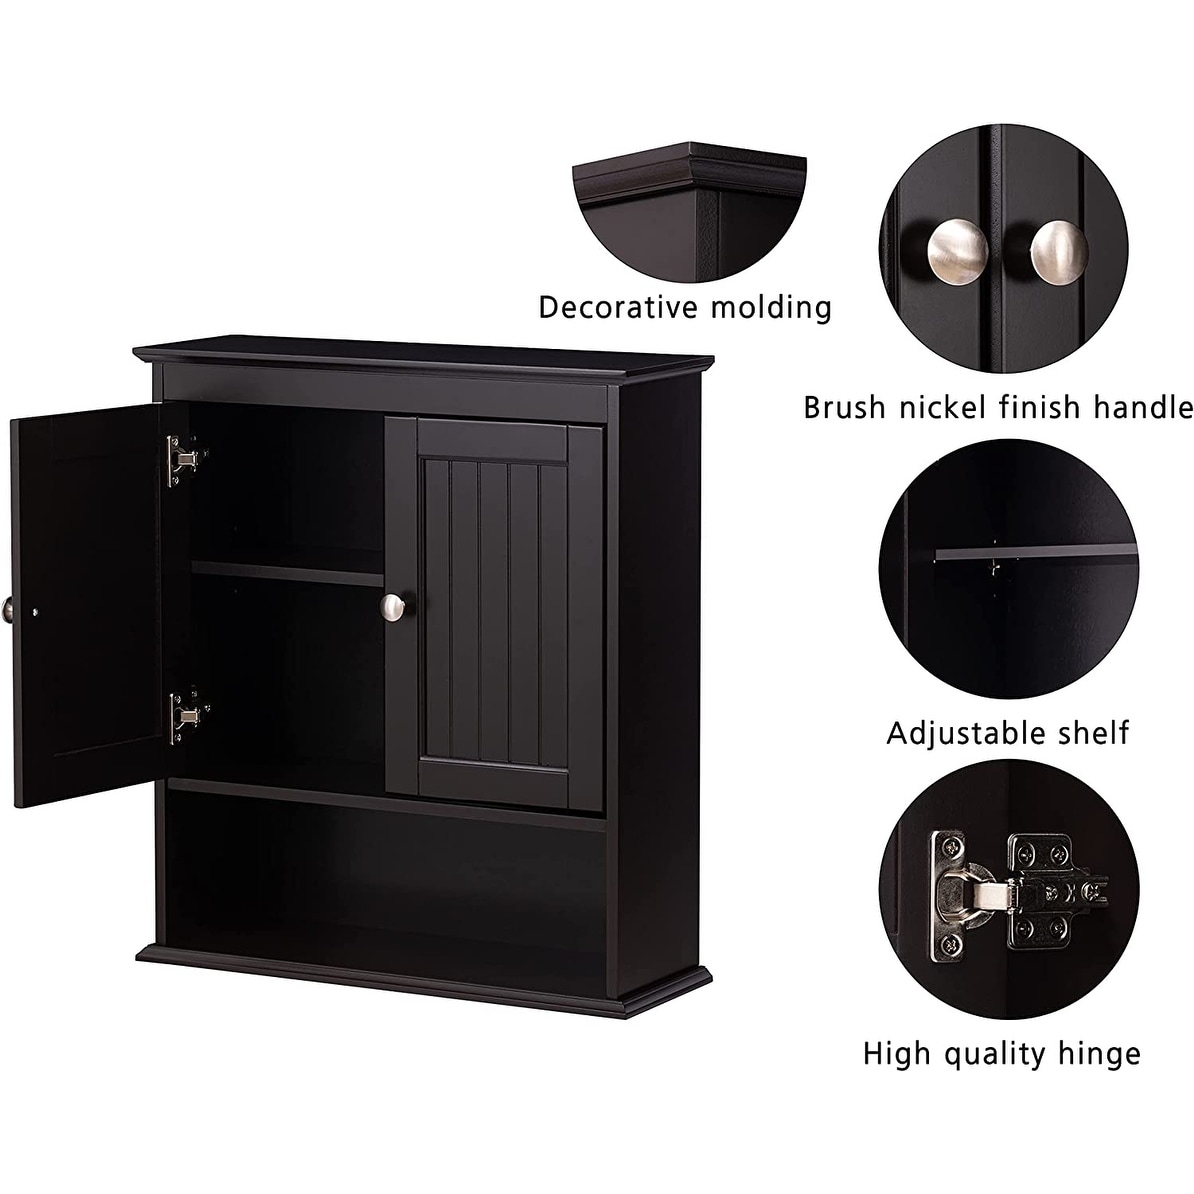 https://ak1.ostkcdn.com/images/products/is/images/direct/7c4162154c64dc01a86467d06b74d816e804b421/Spirich-Bathroom-Wall-Spacesaver-Storage-Cabinet-Over-The-Toilet-with-Door-%2C-Wooden%2C-White.jpg